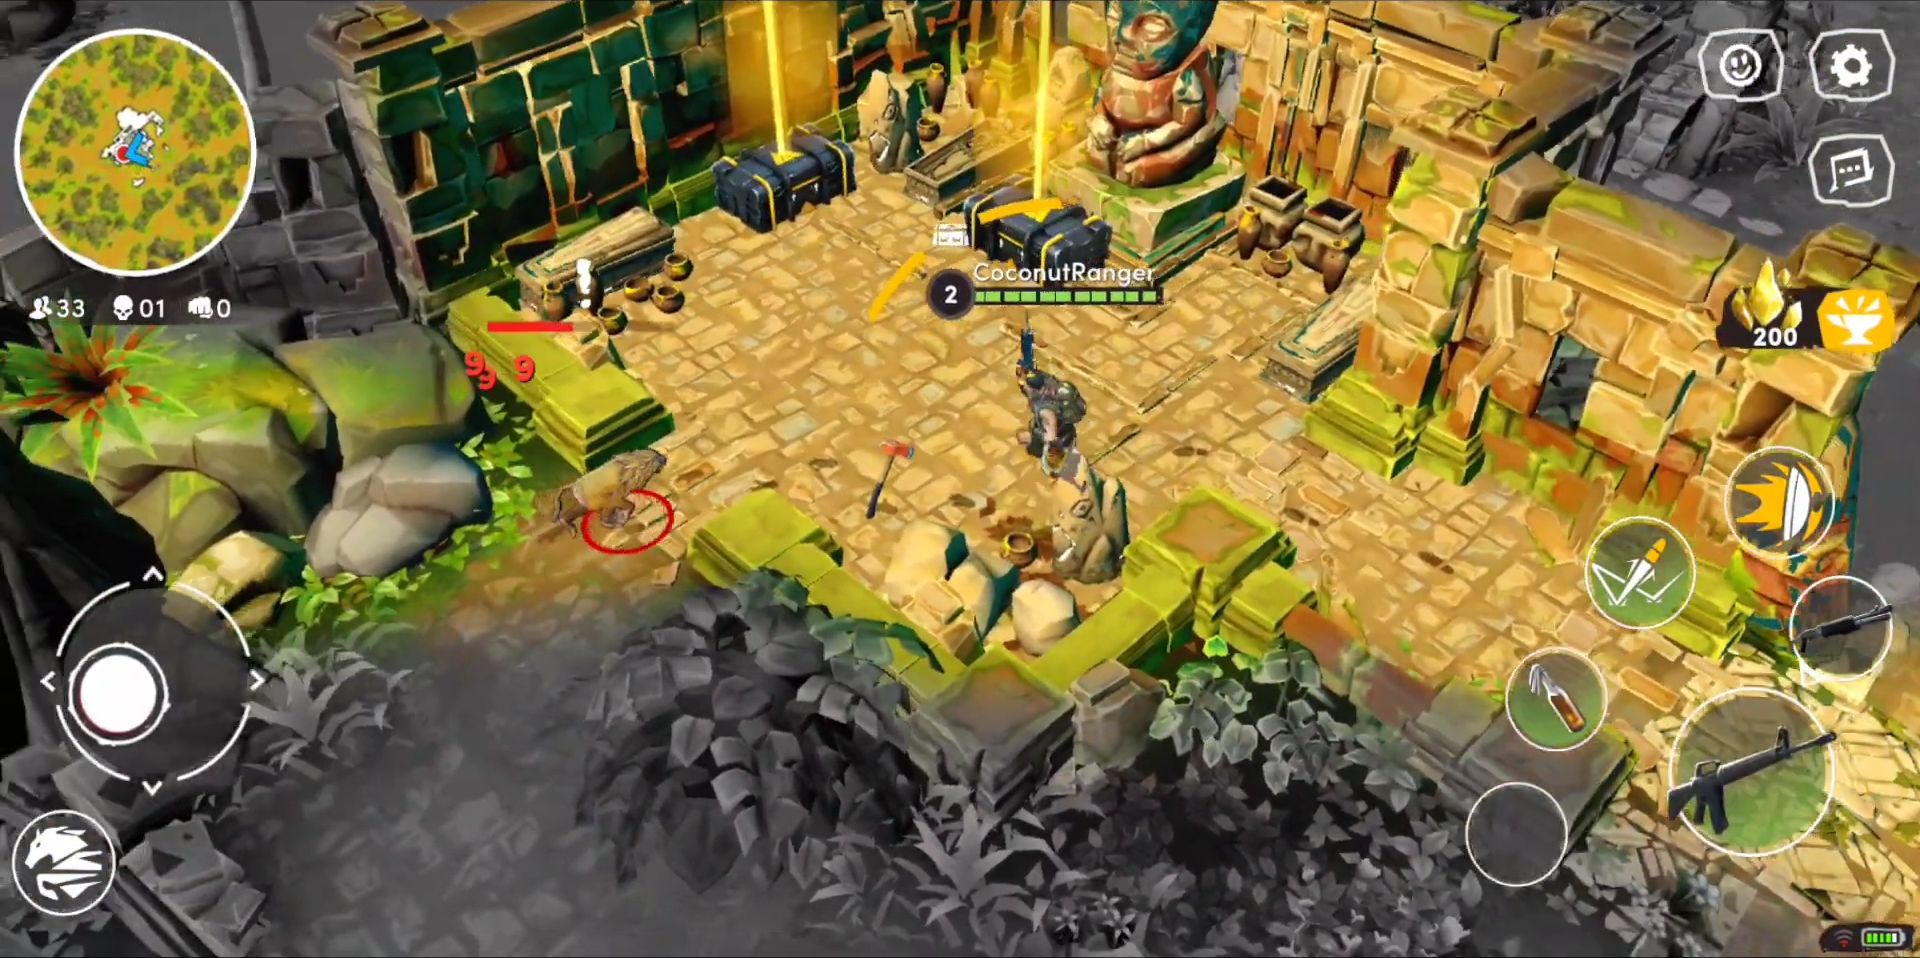 Gameplay of the Wild Arena Survivors for Android phone or tablet.